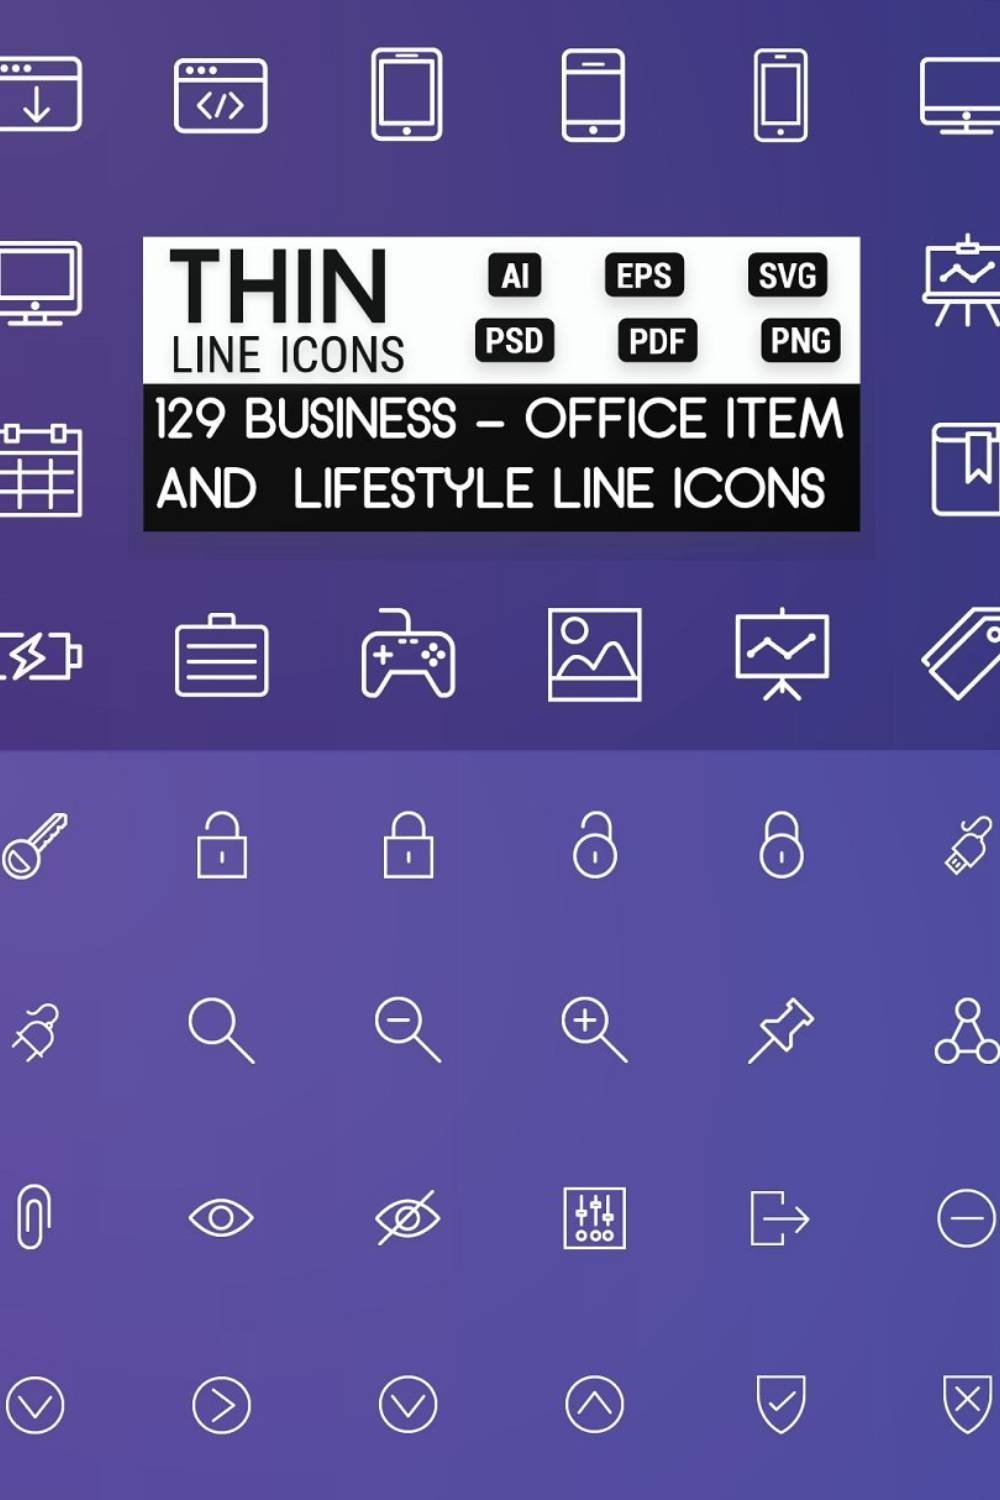 Business - Lifestyle & Office Icons Pinterest Cover.